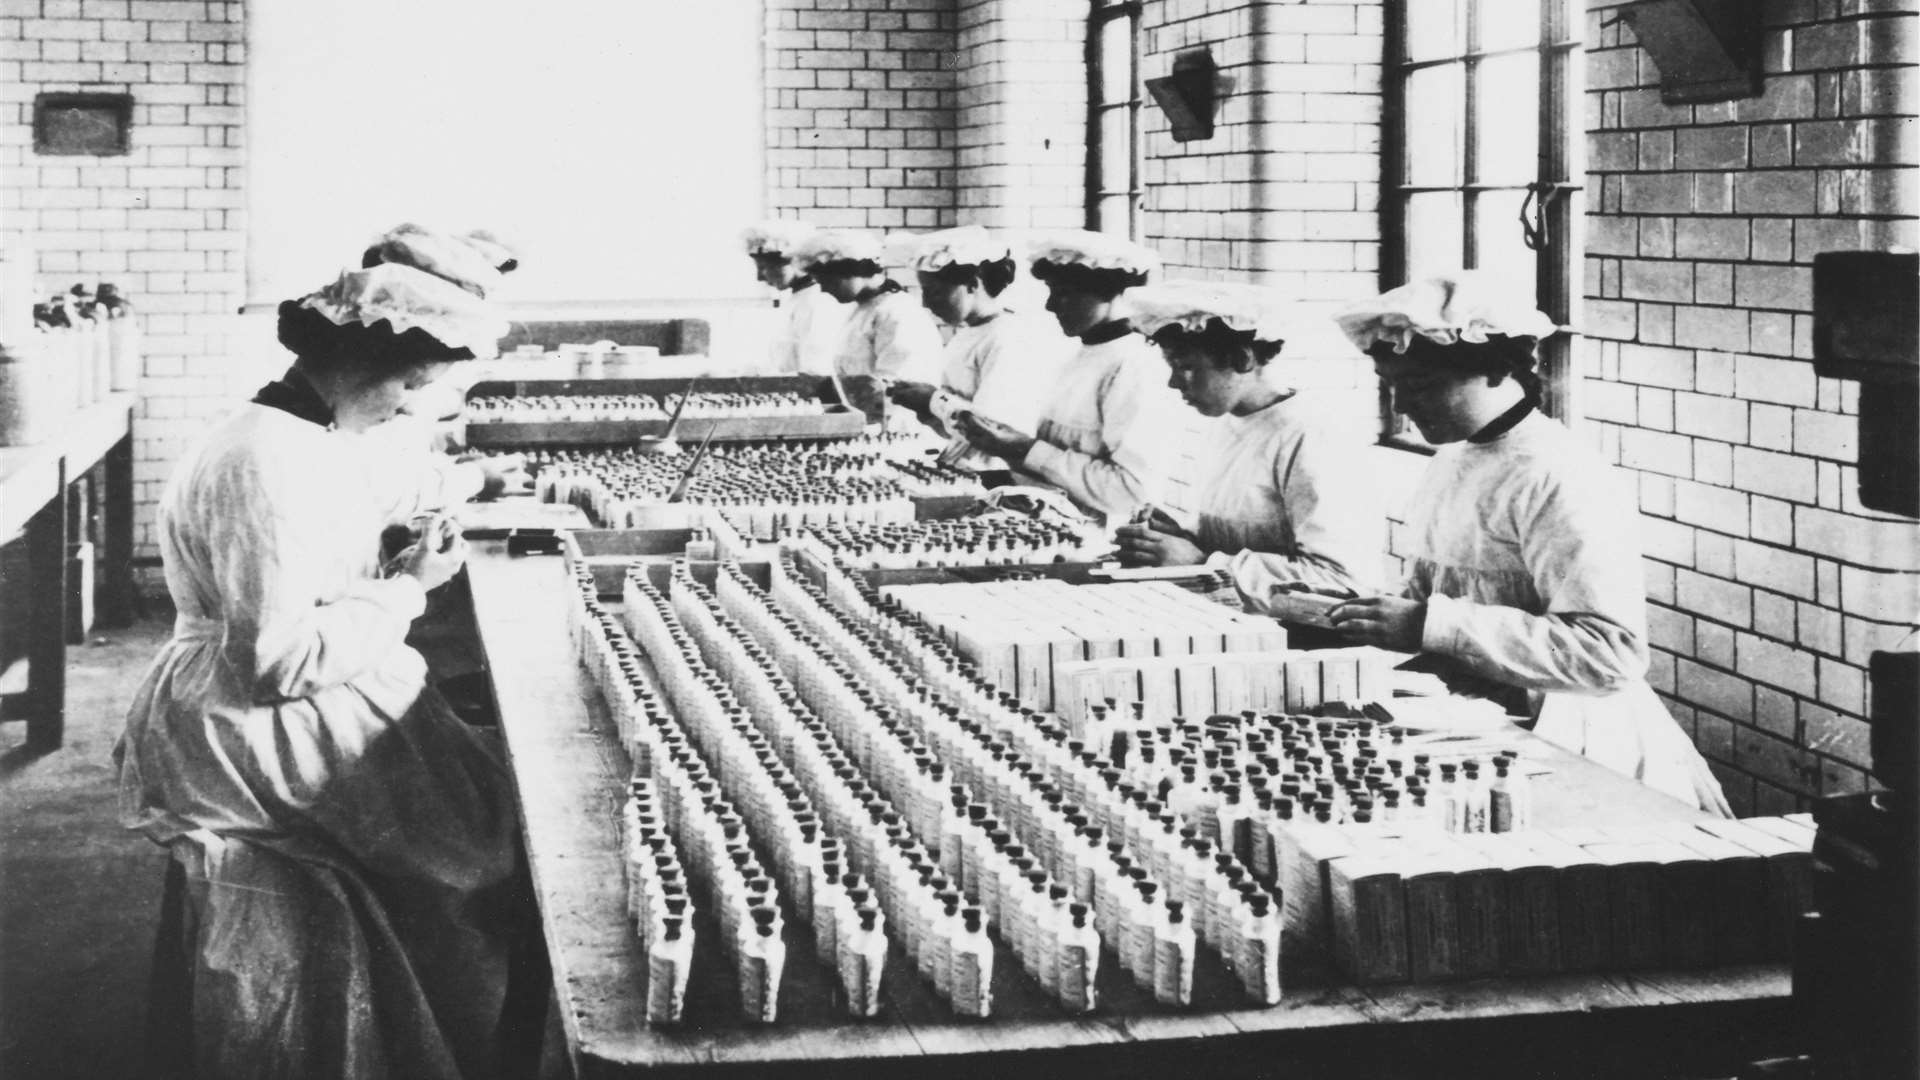 Female workers on the packing floor of the Wellcome factory at Mill Pond in Dartford.